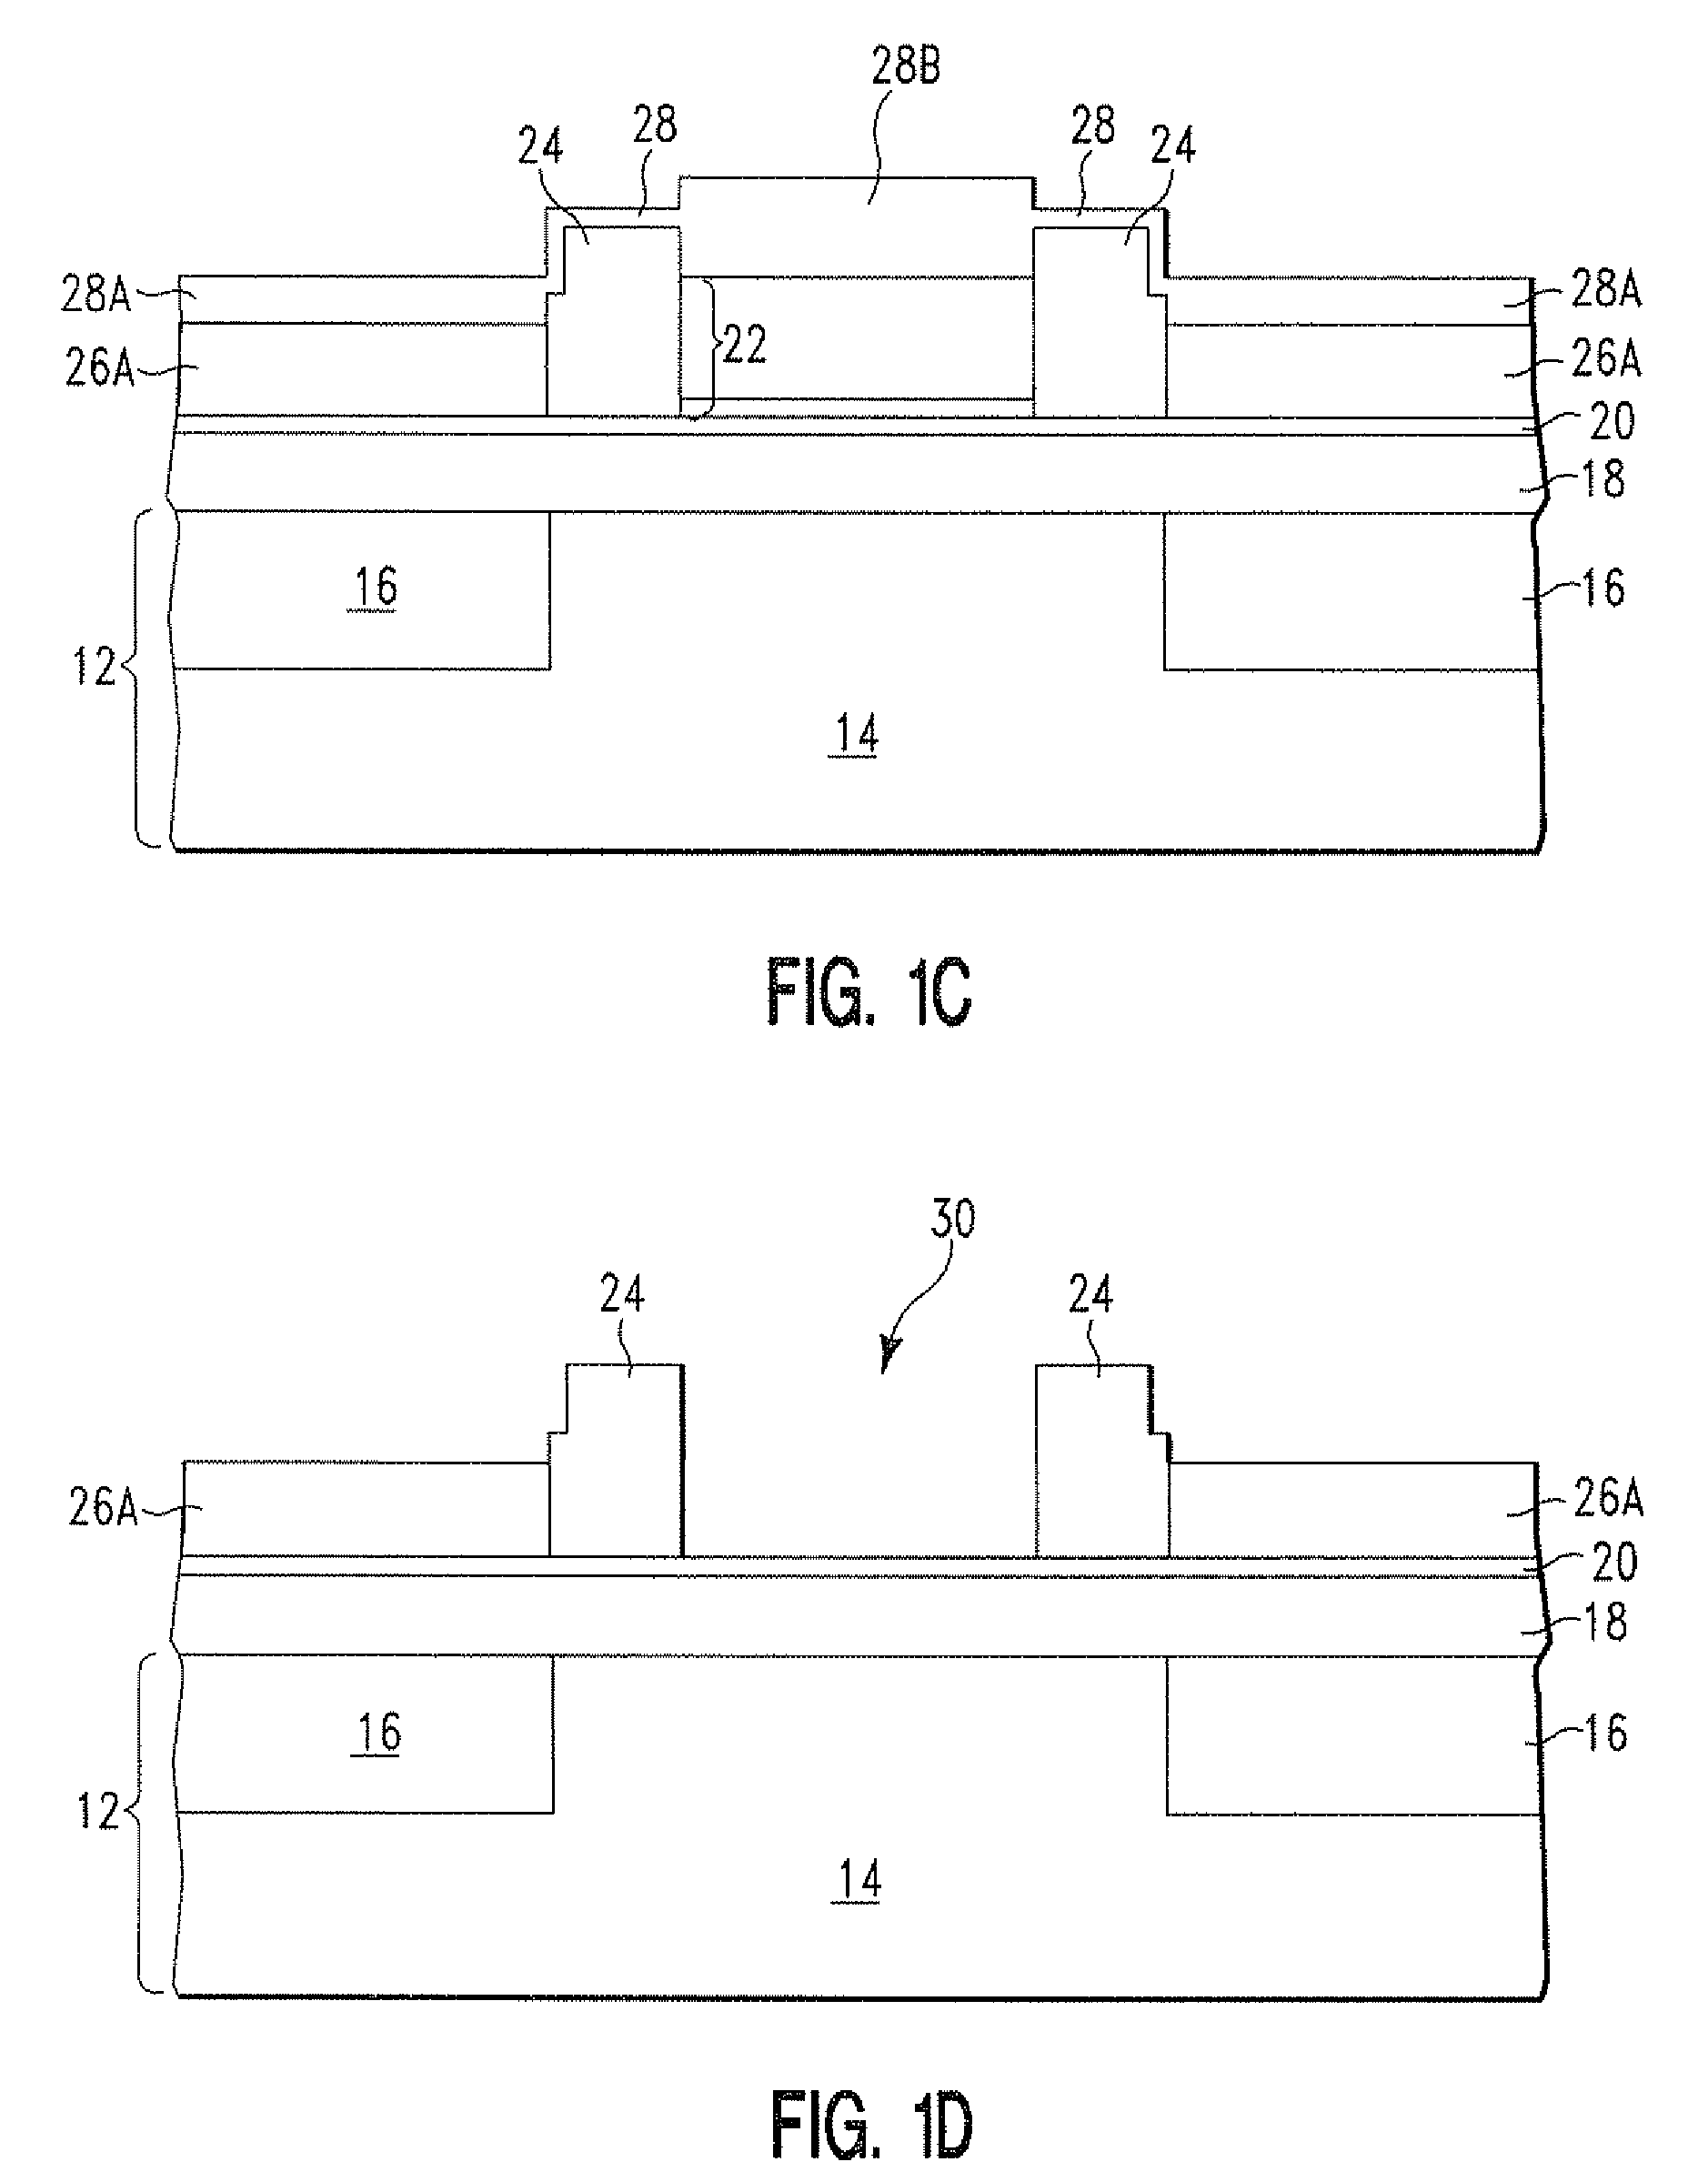 Method to build self-aligned NPN in advanced BiCMOS technology